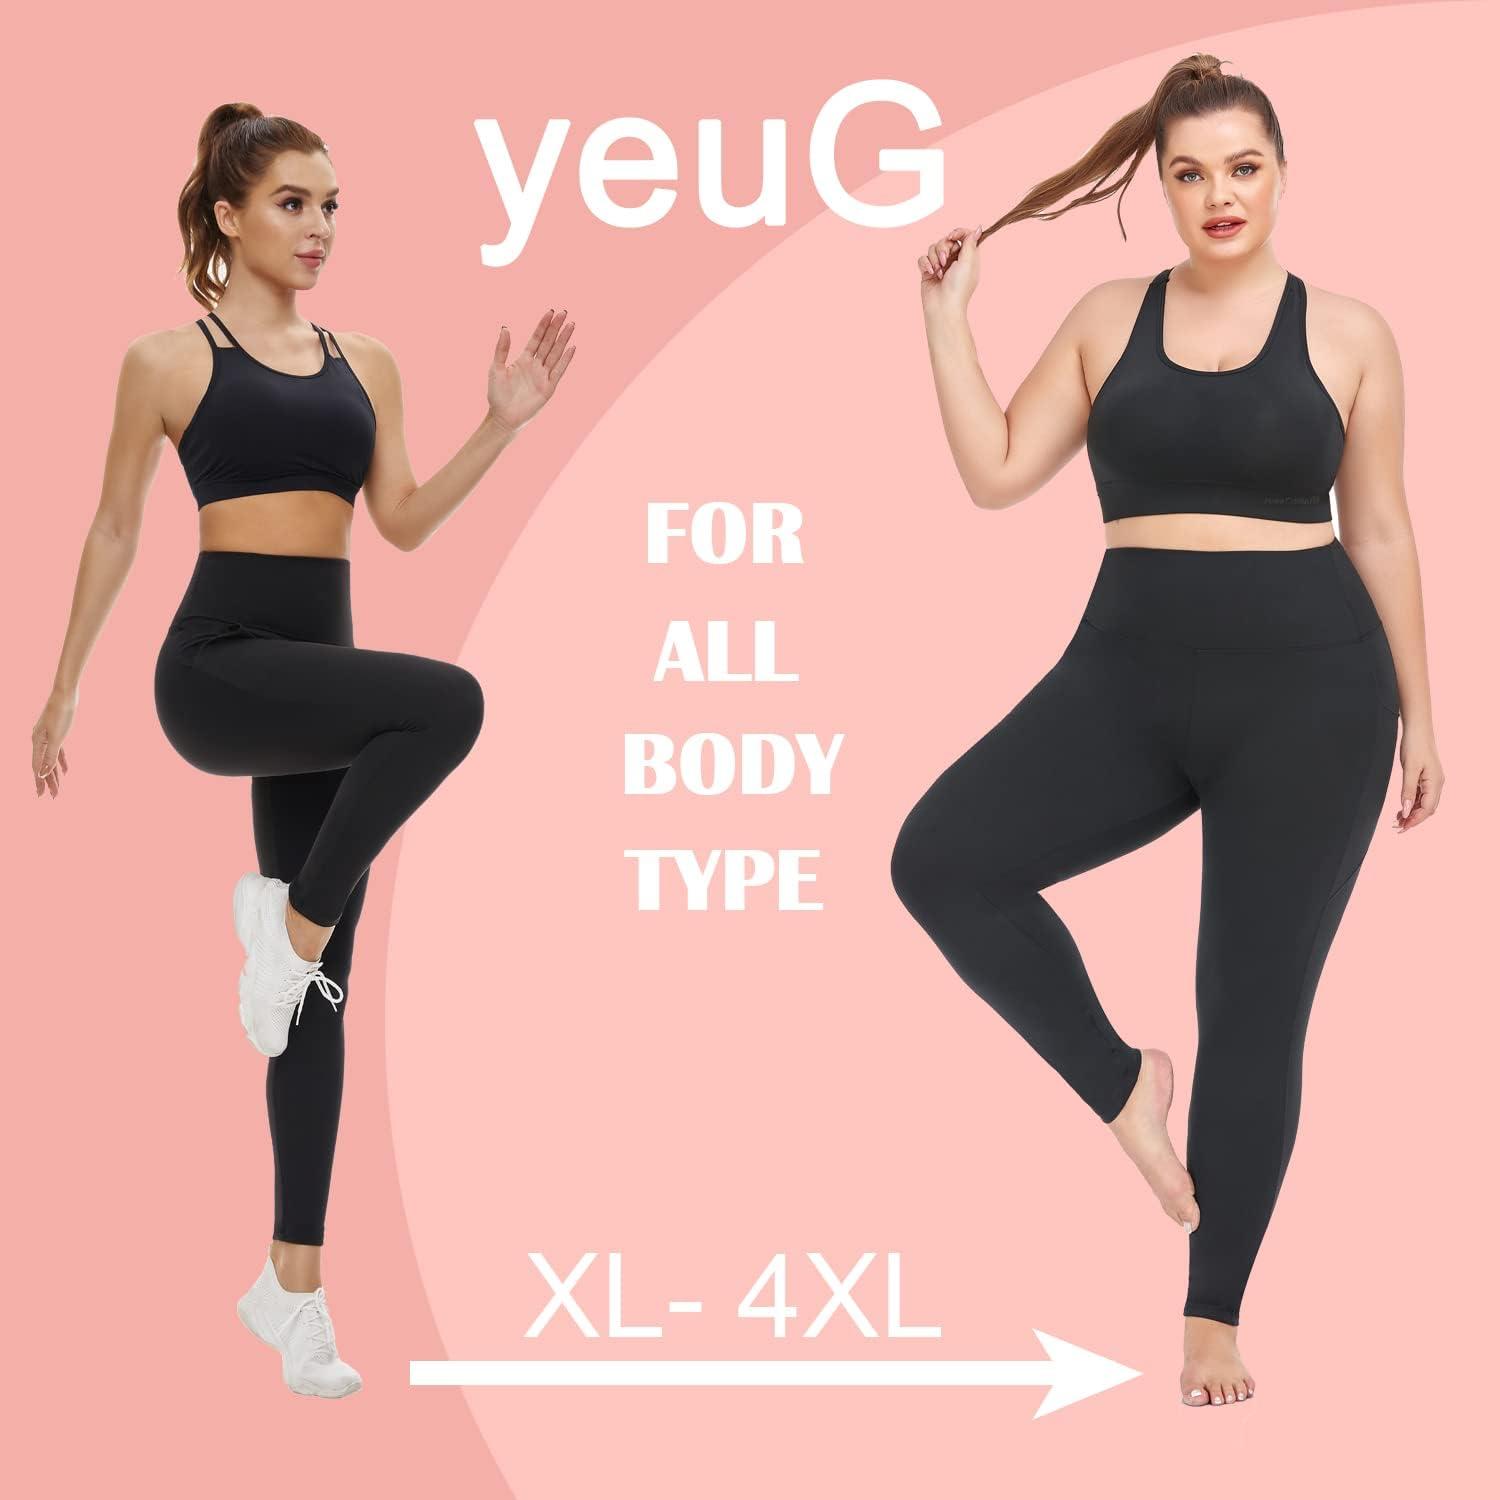  3 Pack Plus Size Leggings For Women - High Waist Stretchy  Tummy Control Pants For Workout Yoga Running Black/Black/Black